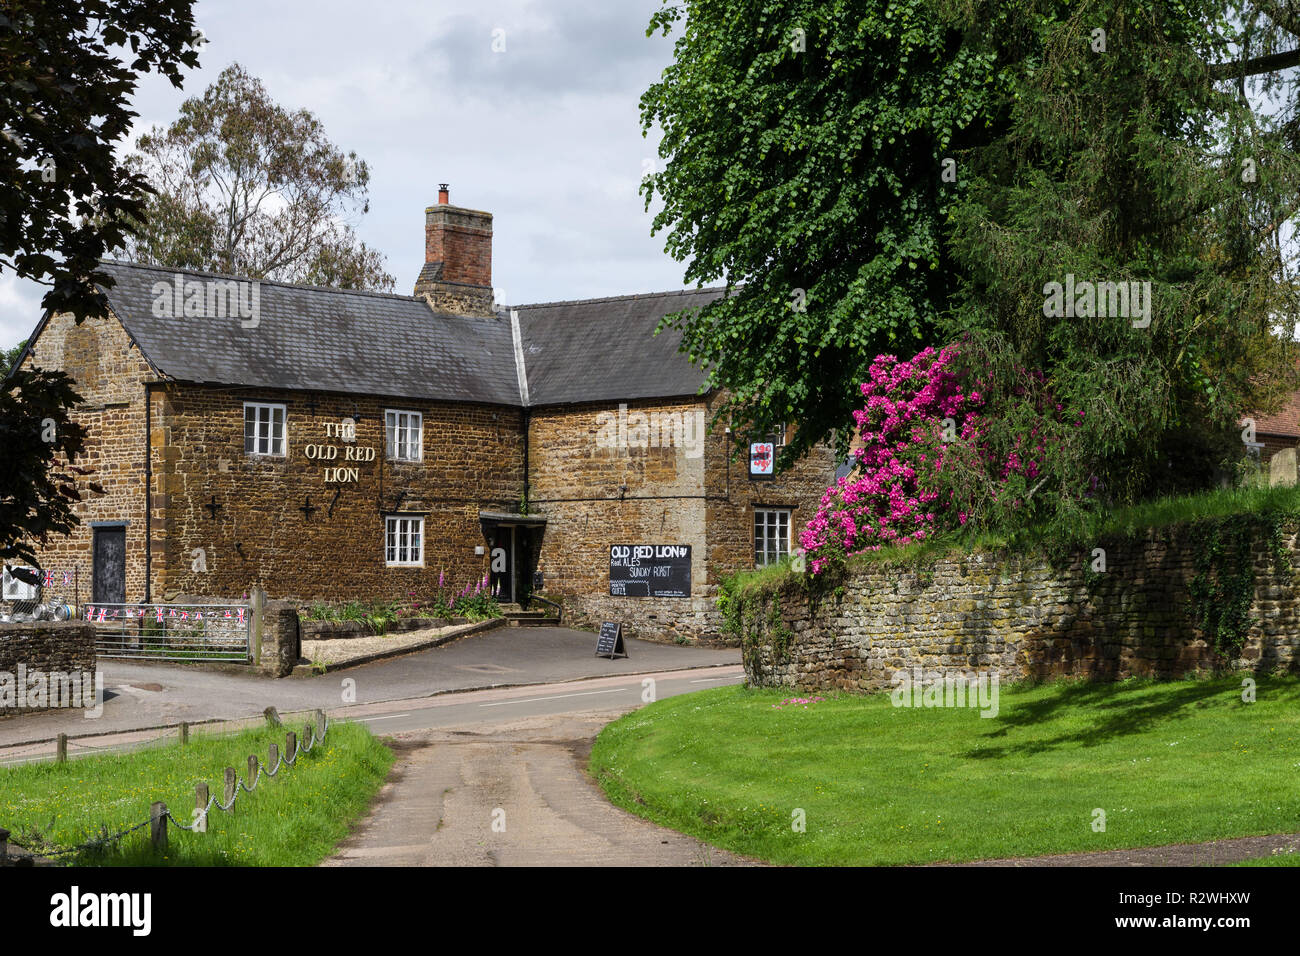 A view across the green to The Old Red Lion, a traditional village pub, Litchborough, Northamptonshire, UK Stock Photo